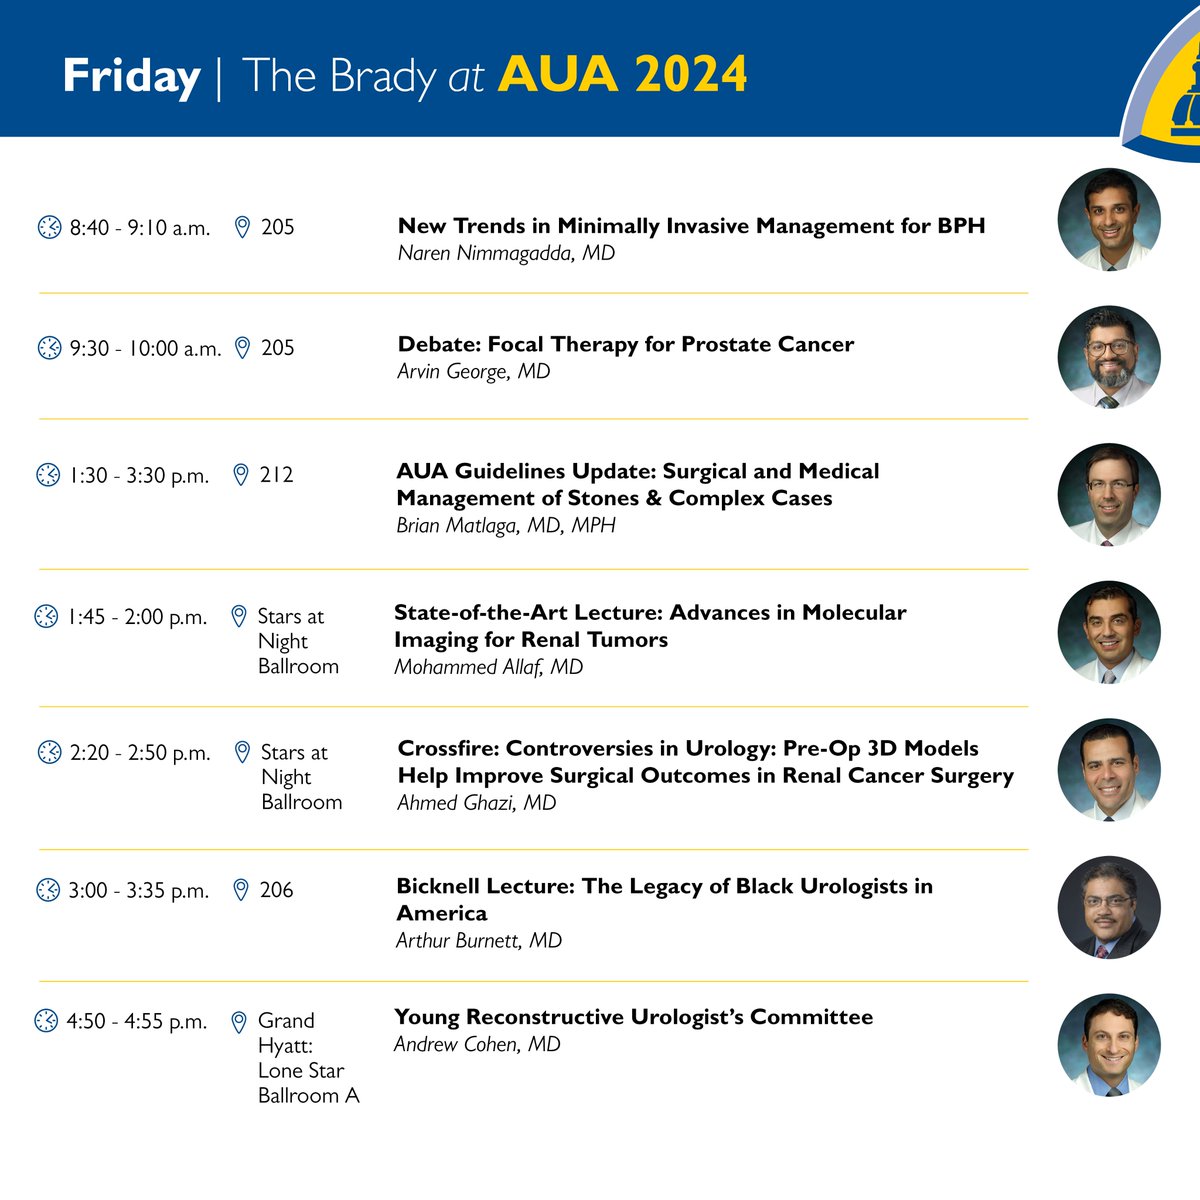 Today's lineup ➡️presentations and sessions w/ our team at #AUA24 including afternoon plenary sessions w/ @allaf_mo & @aghazimd! Stay tuned for today's abstract recaps. Full list of abstracts at bit.ly/JHMatAUA. @arvinkgeorge @AJCuro @lemonrock_MD @AmerUrological